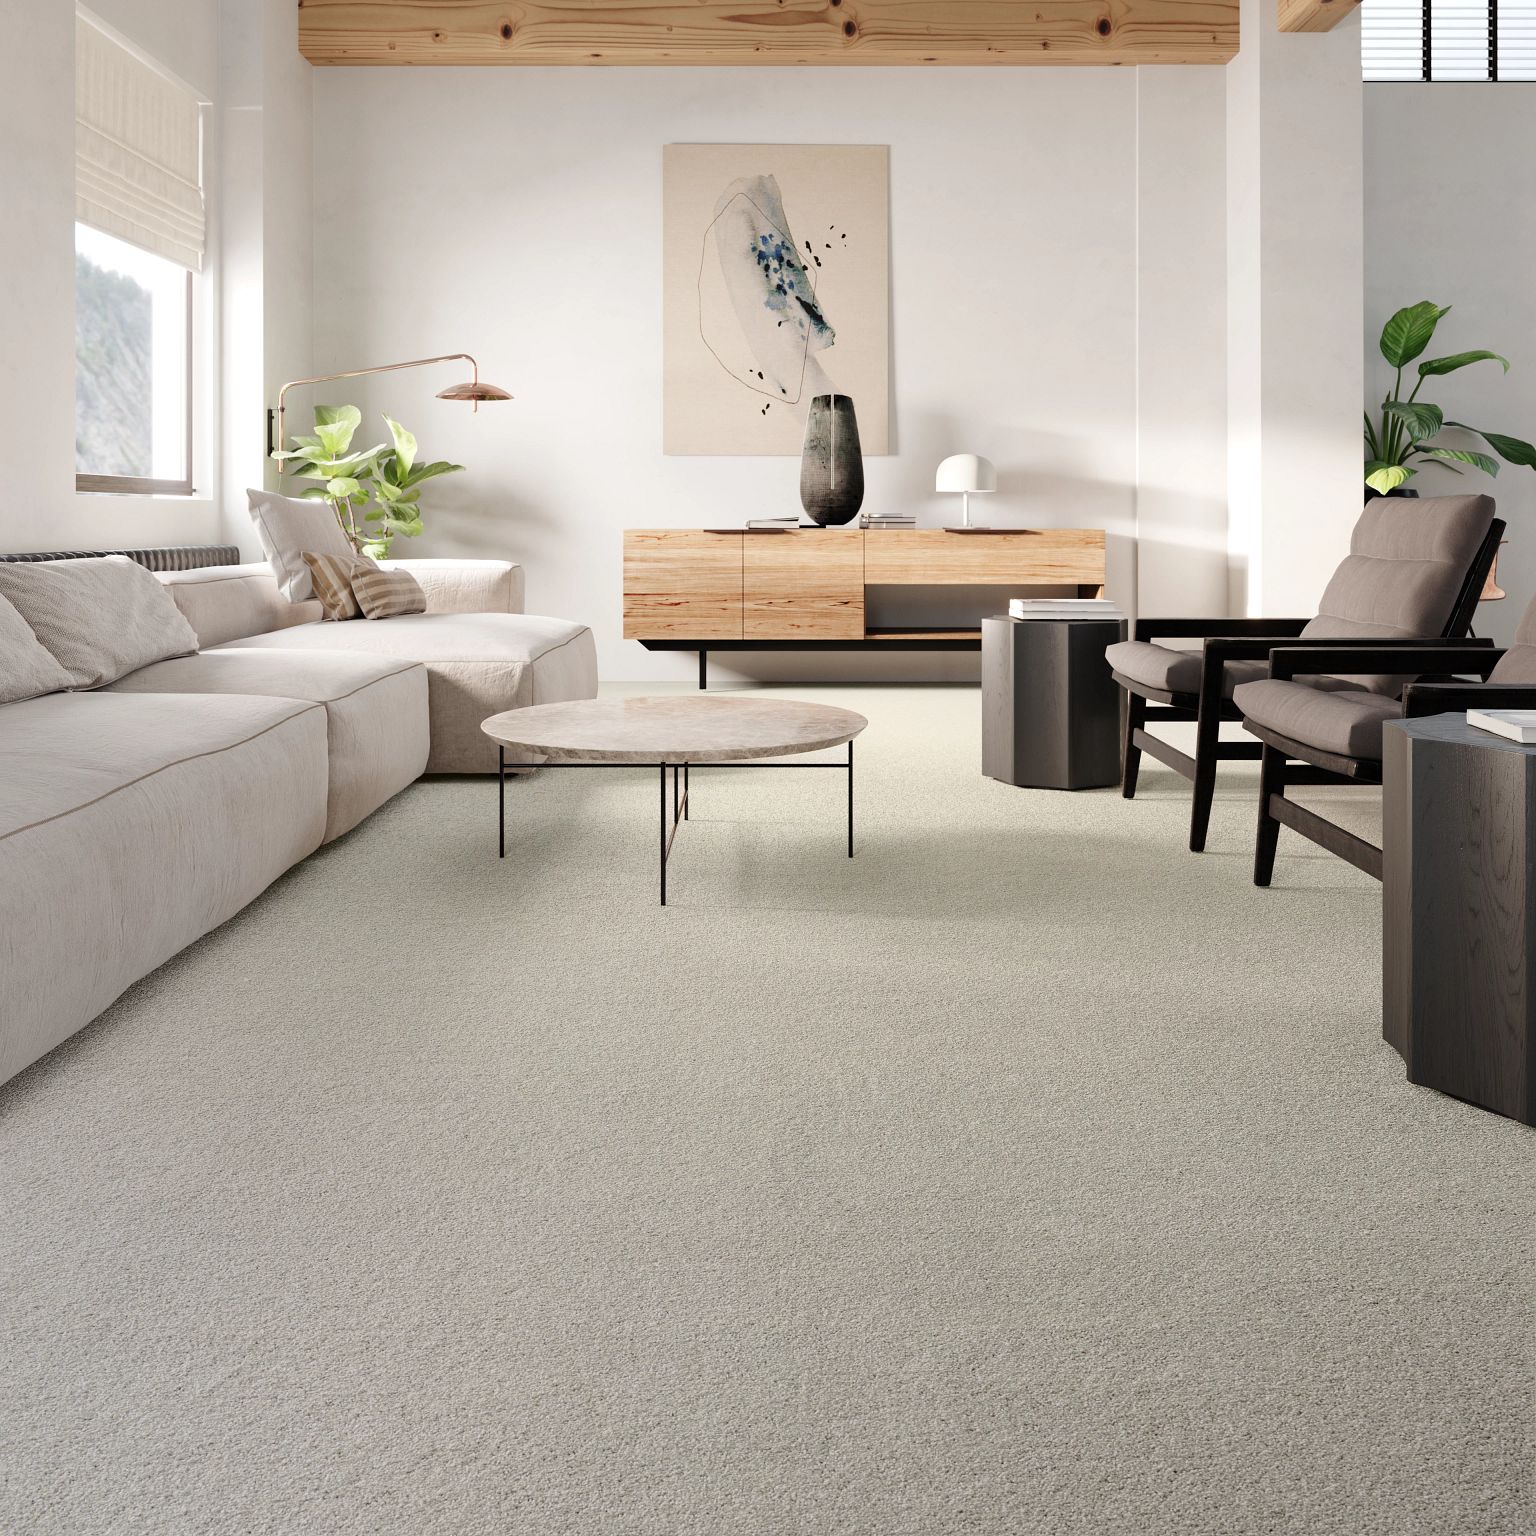 Mannington Commercial Launches Dwellings Collection Floor Ering News